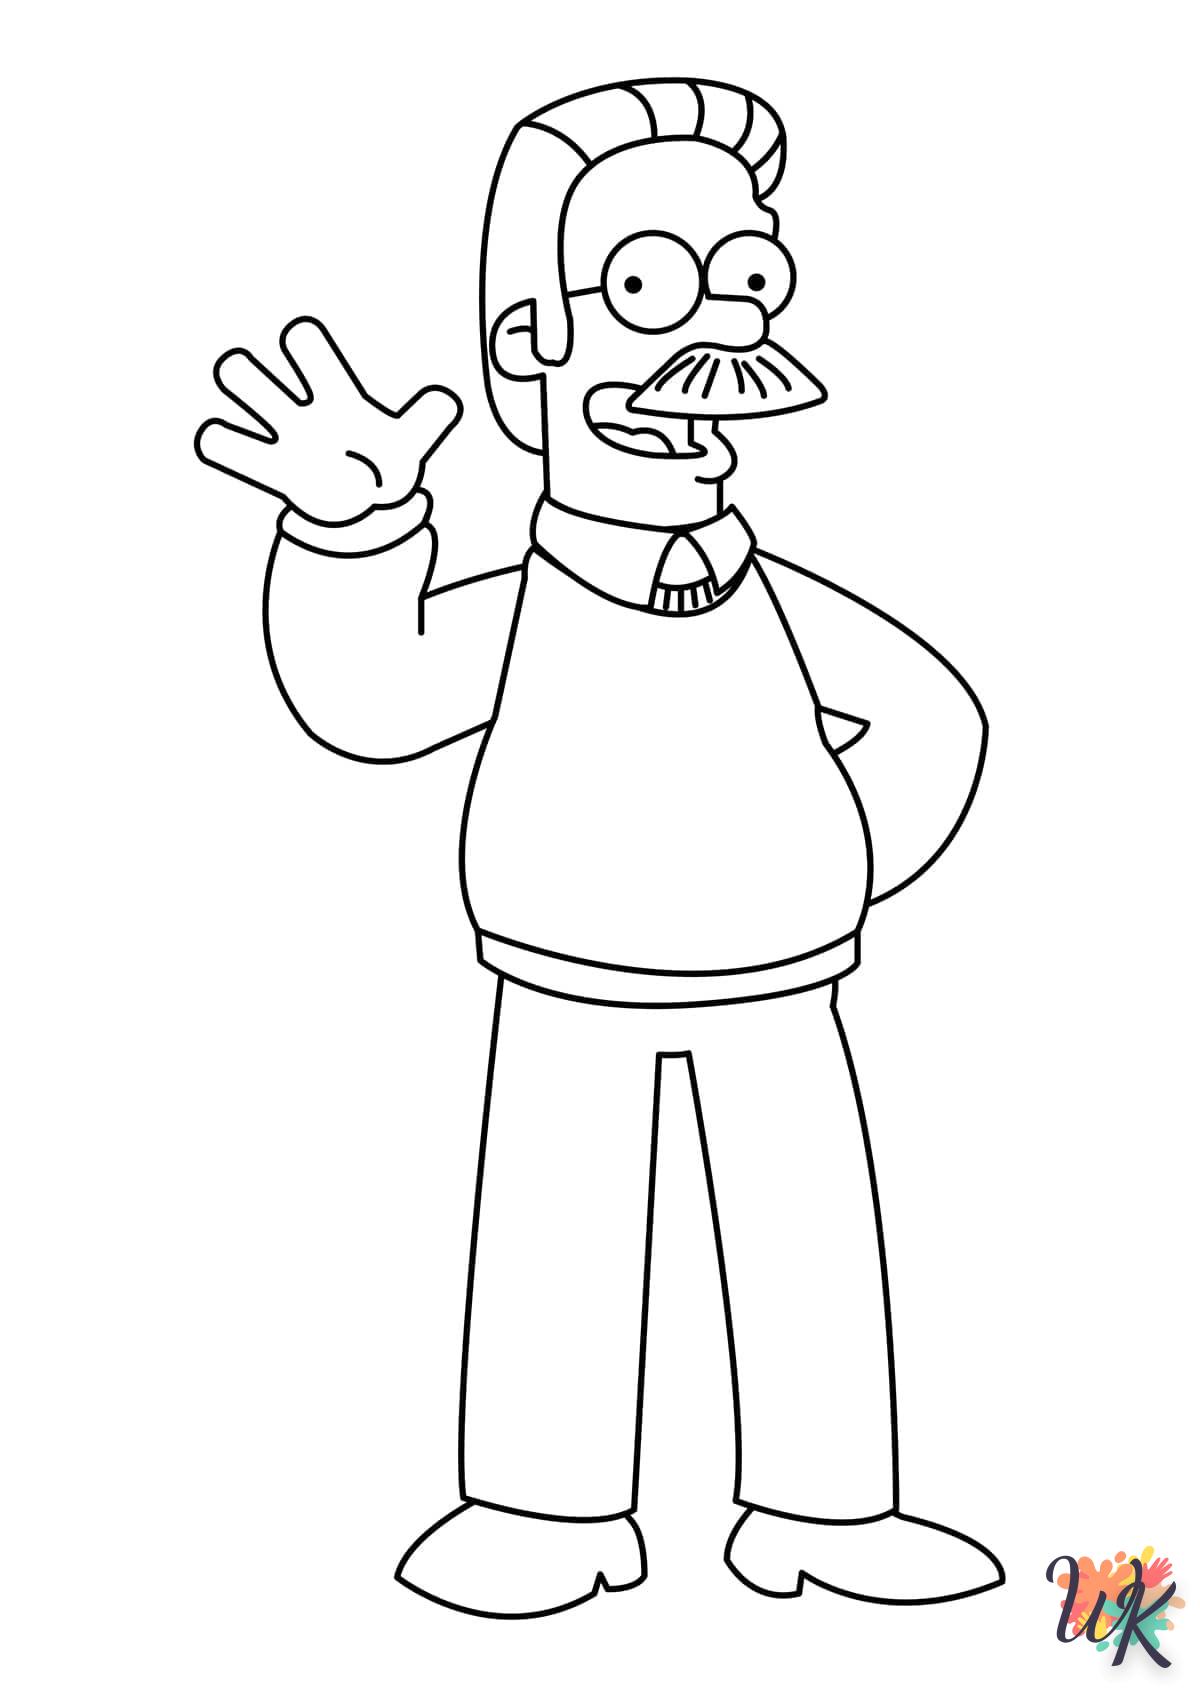 Coloriage Simpsons 56